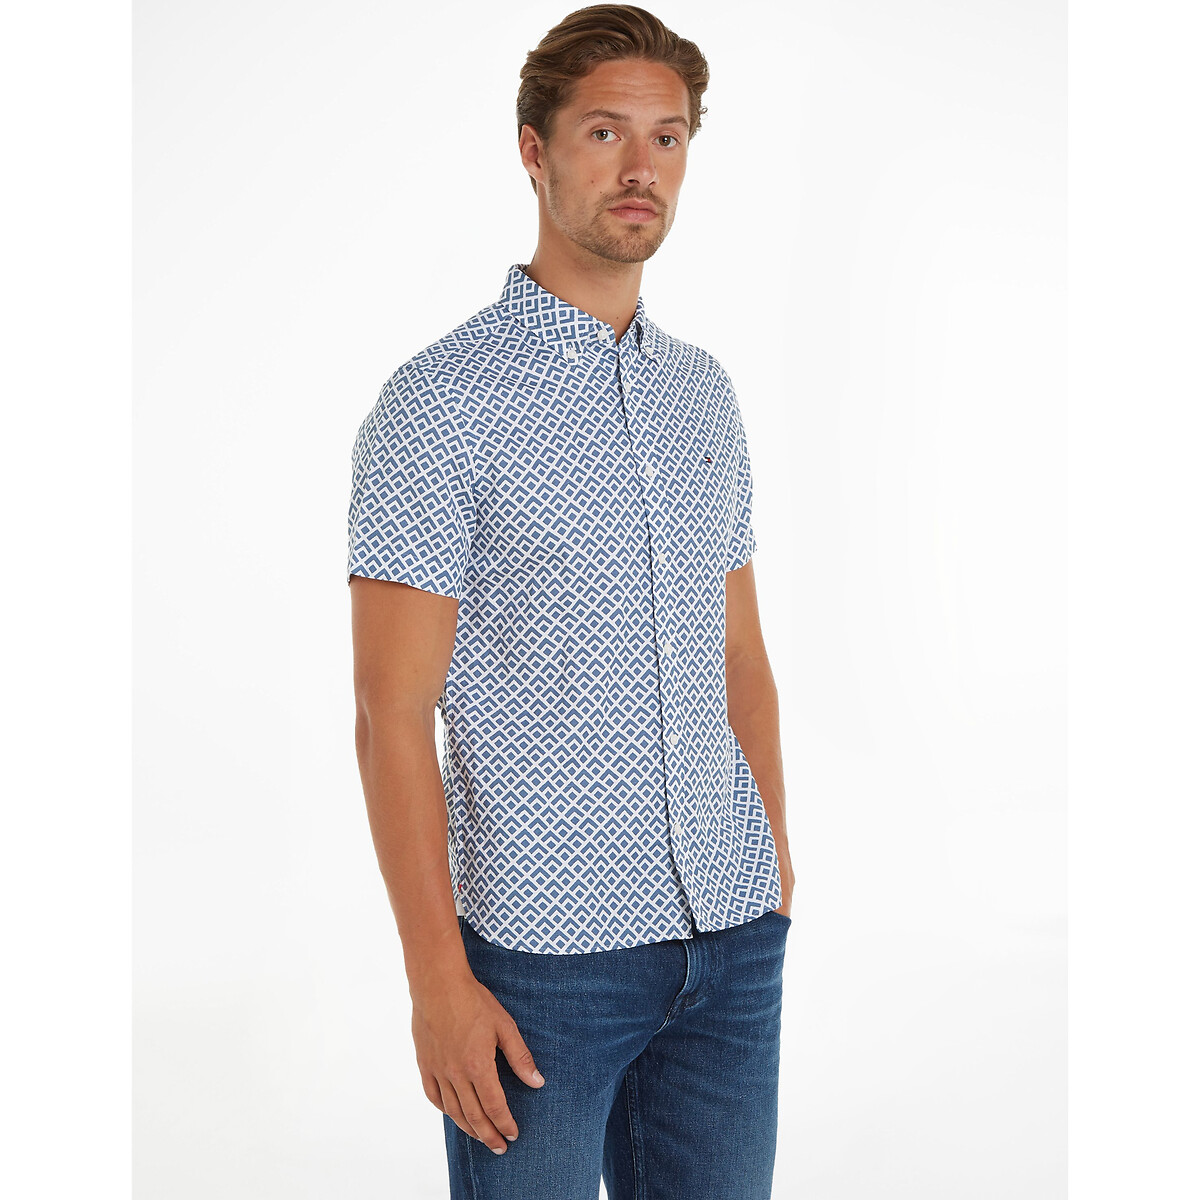 Image of Printed Cotton/Linen Shirt with Short Sleeves